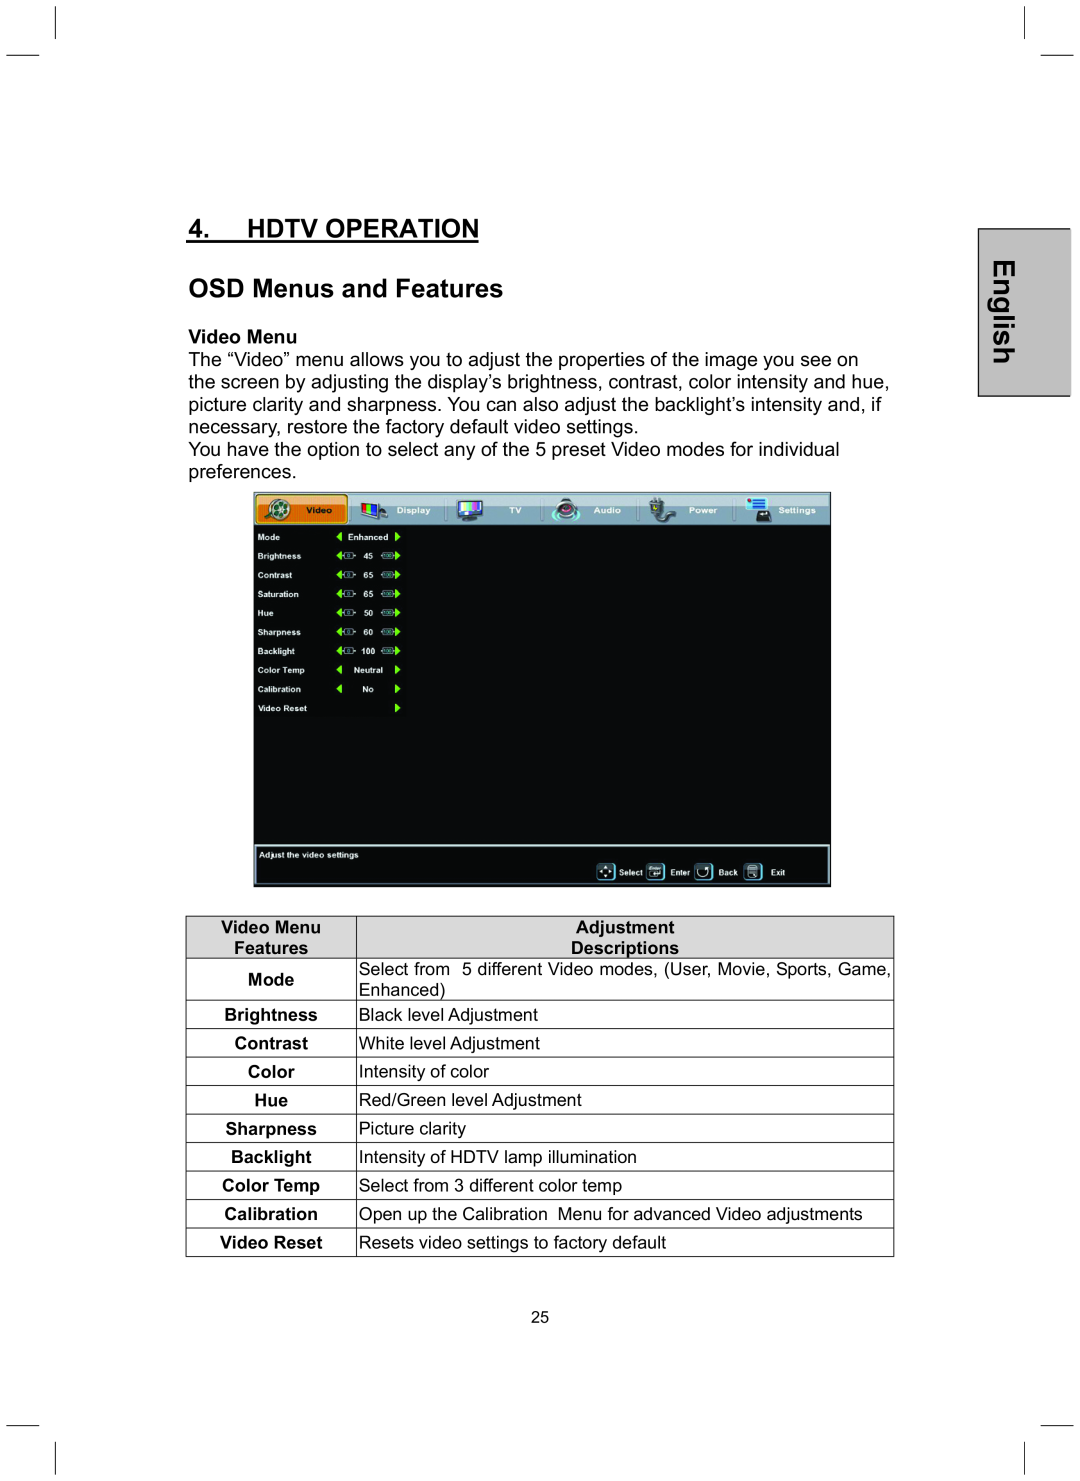 Westinghouse TX-52H480S user manual HDTV OPERATION OSD Menus and Features, Video Menu, English 